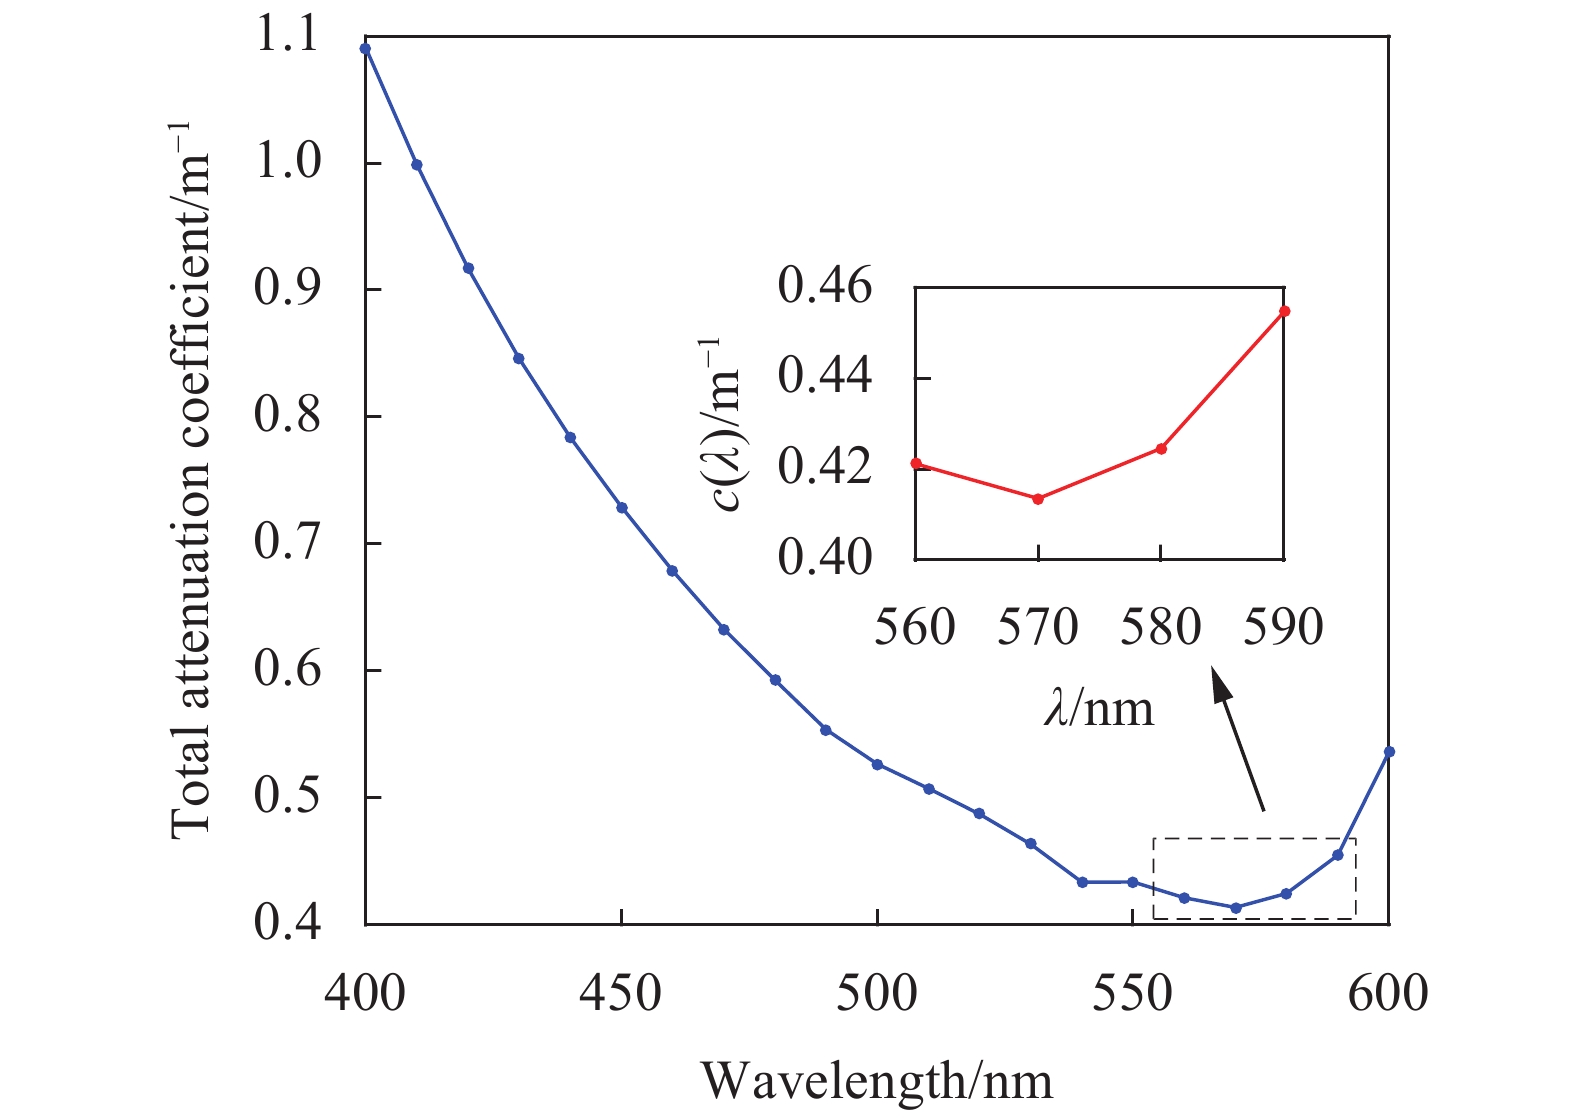 Total attenuation coefficient of optical signals of different wavelengths in coastal ocean